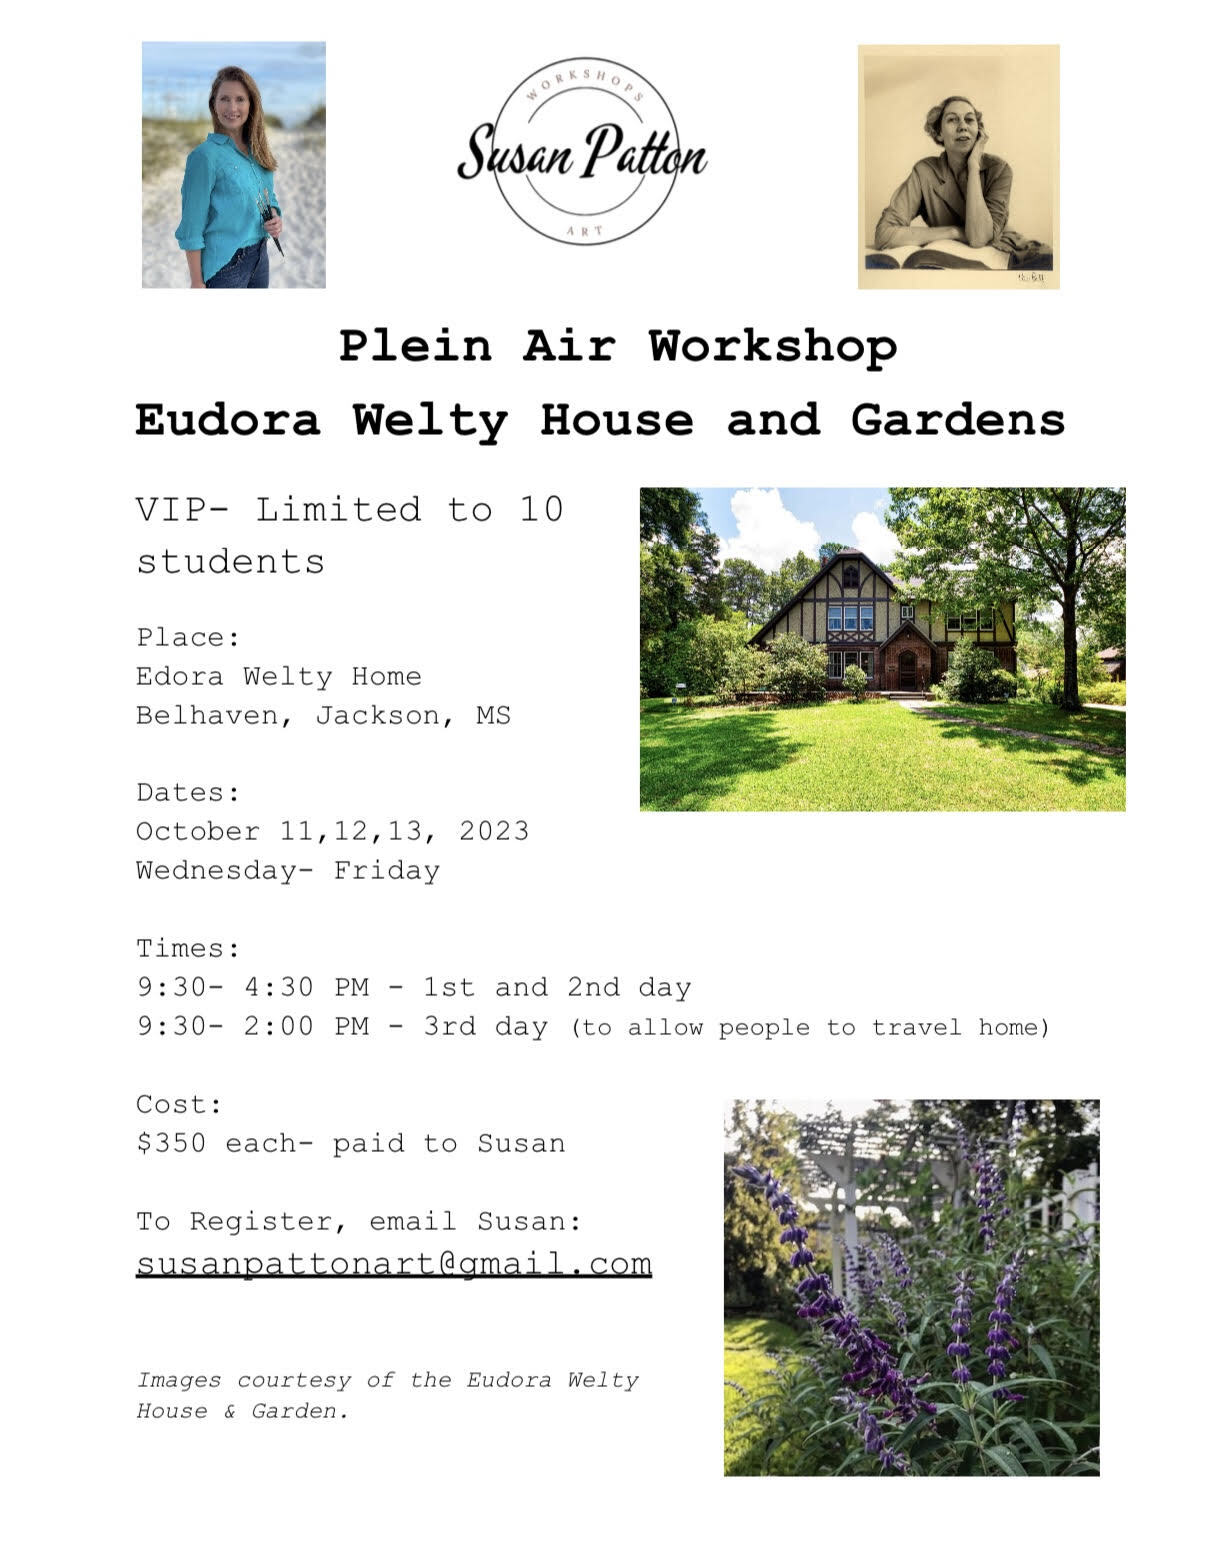 Invitation to Plein Air Oil Painting Workshop at Eudora Welty House & Garden with Instructor Susan Patton